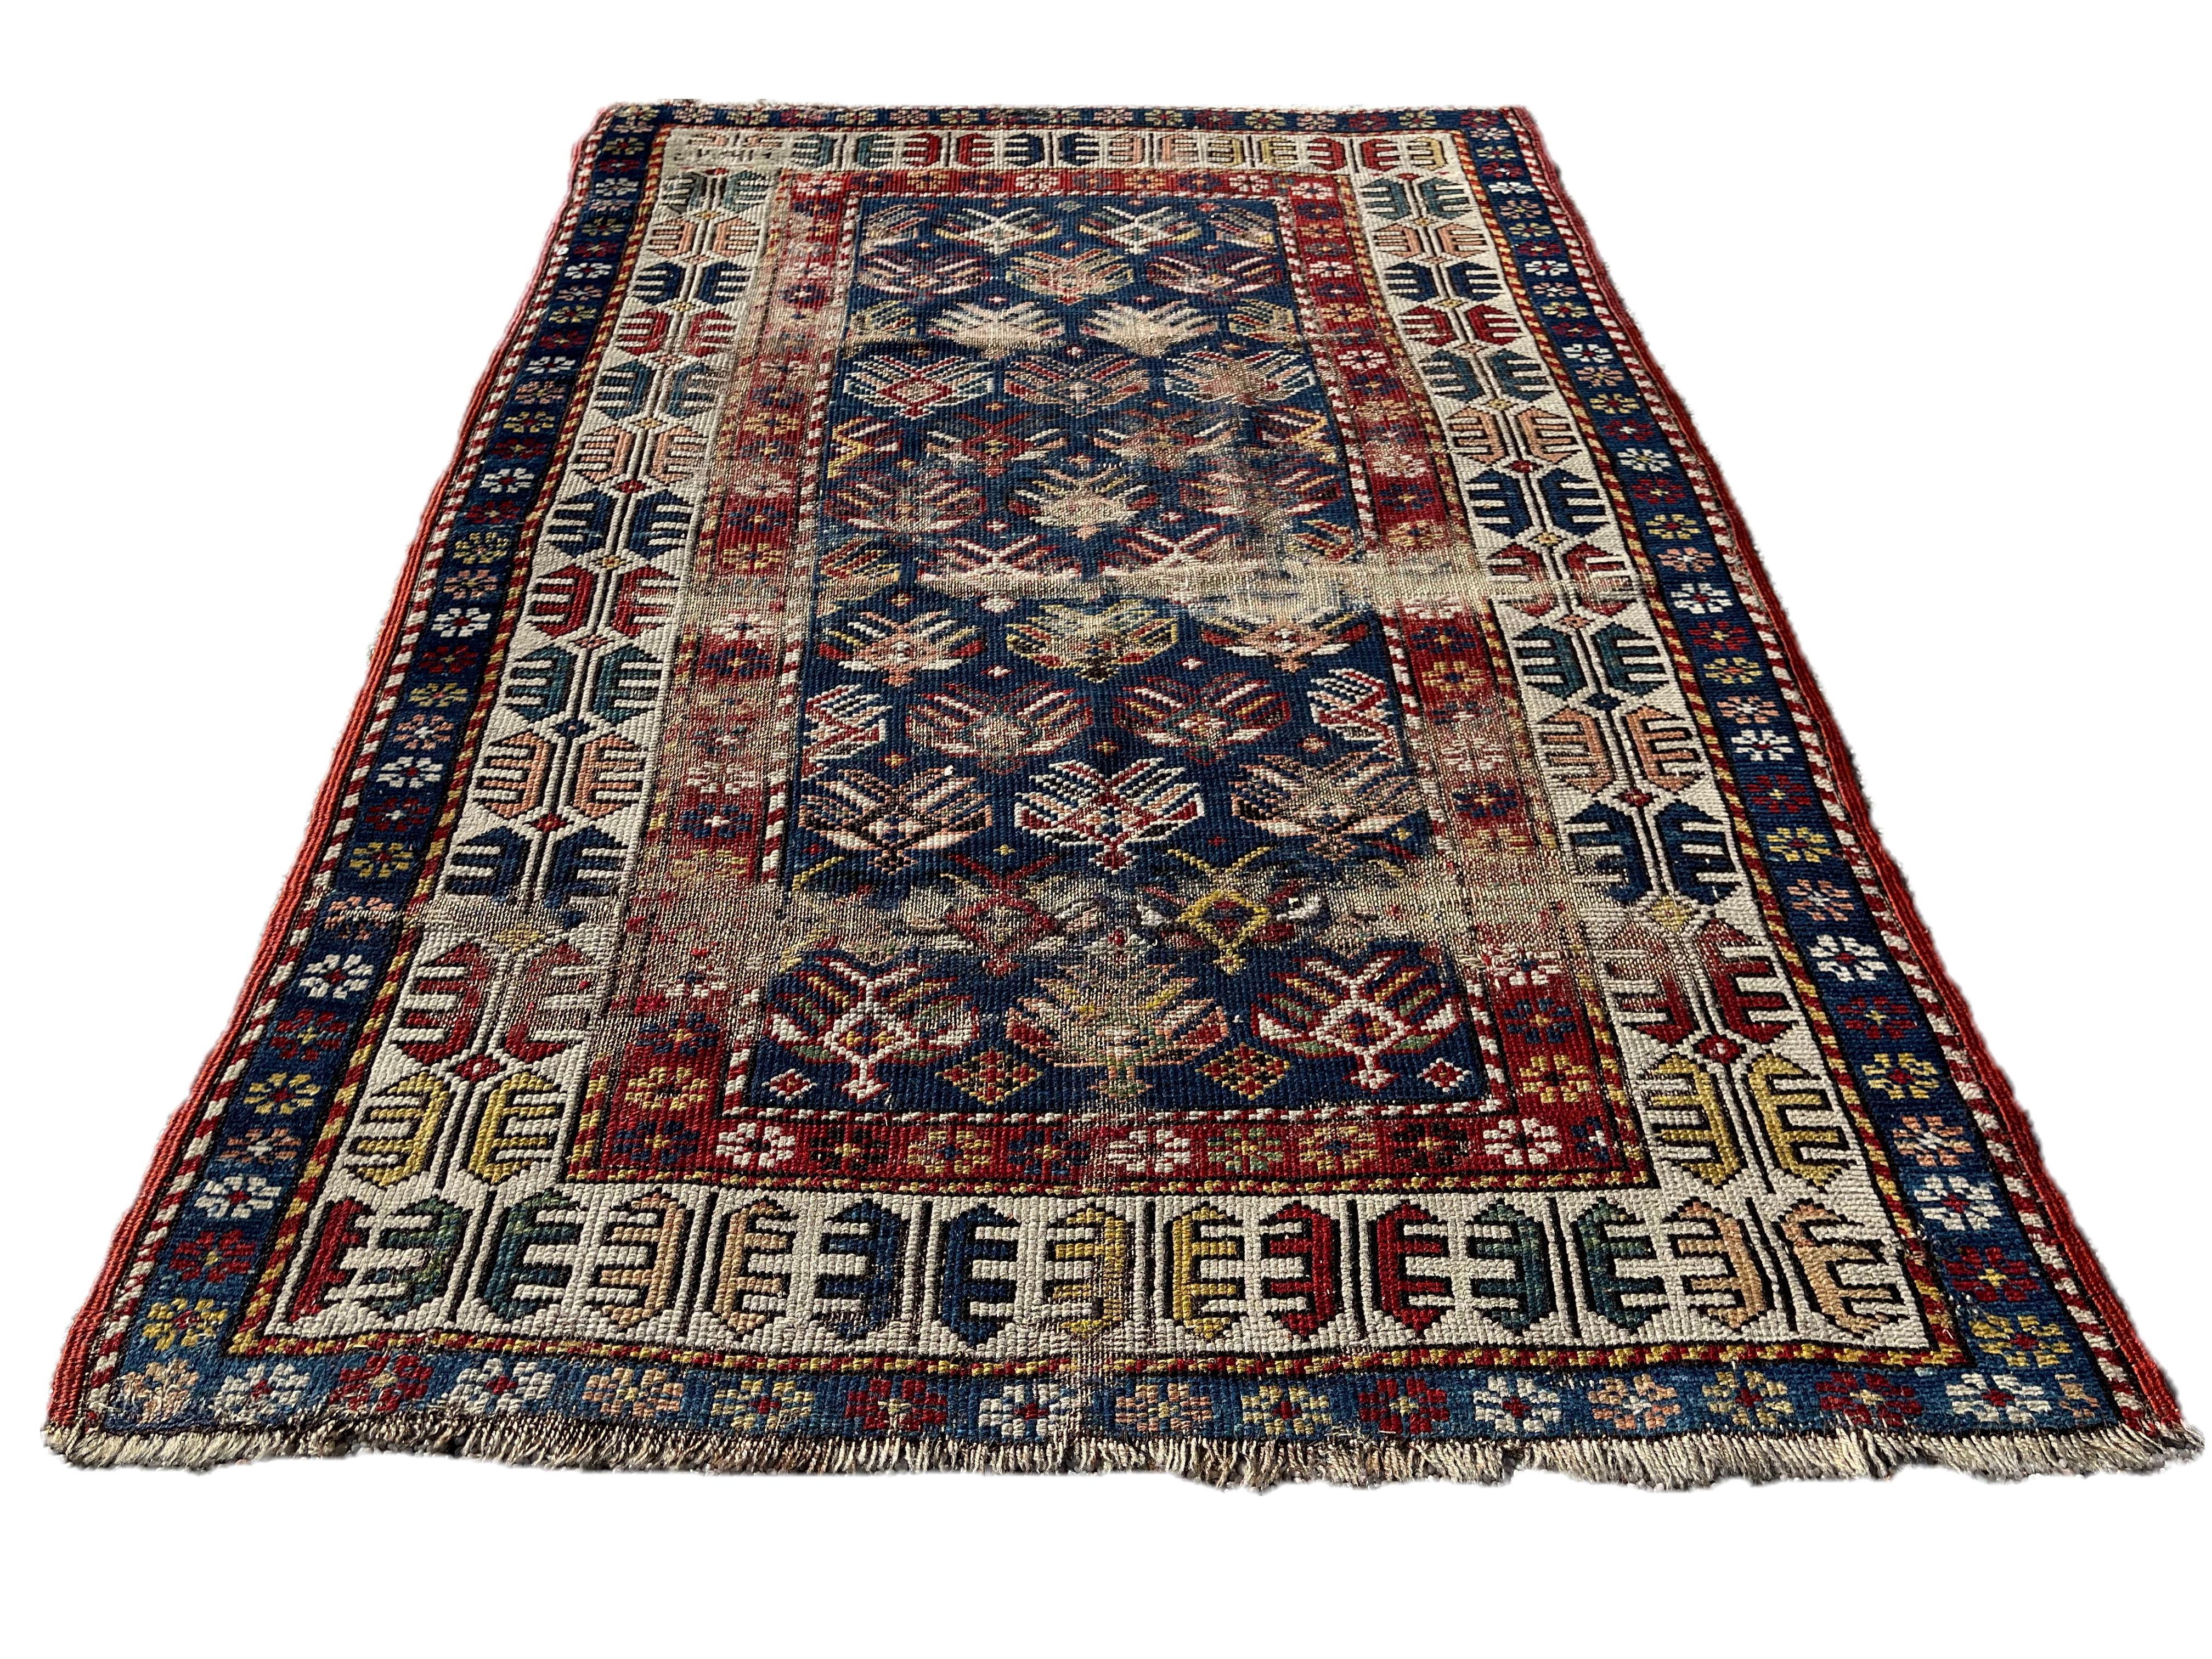 Caucasus hand woven antique rug. Dated 1306.

Beautifully hand woven rug with beautiful color combinations and good quality wool.
